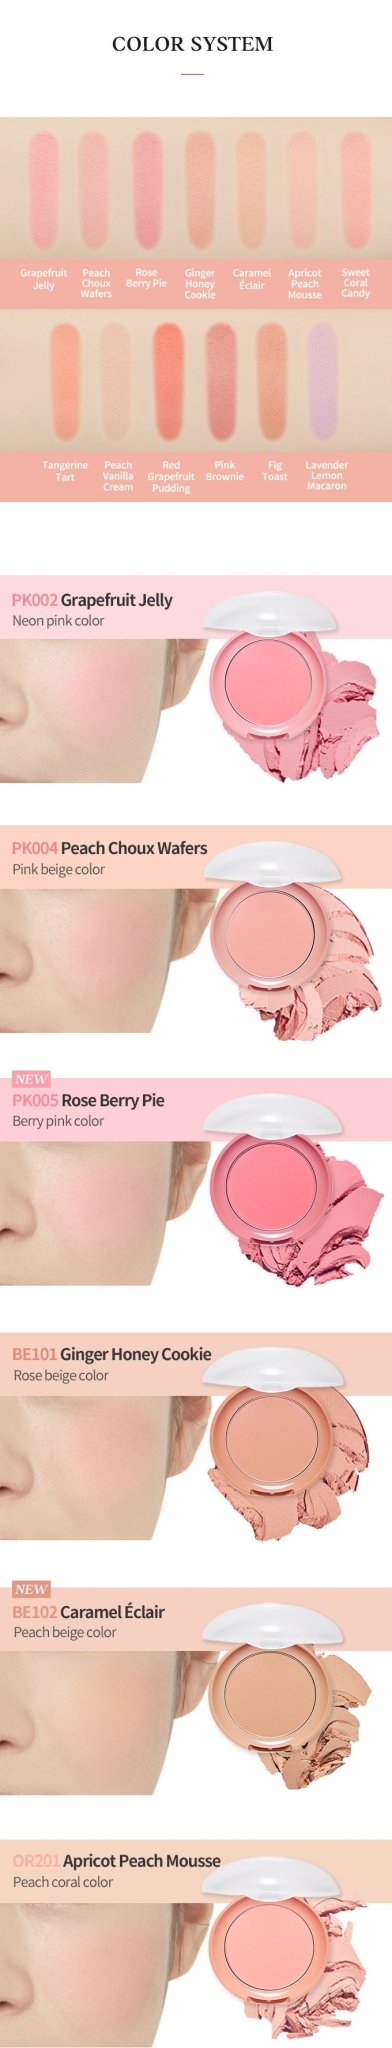 ETUDE HOUSE Lovely Cookie Blusher 4g - 